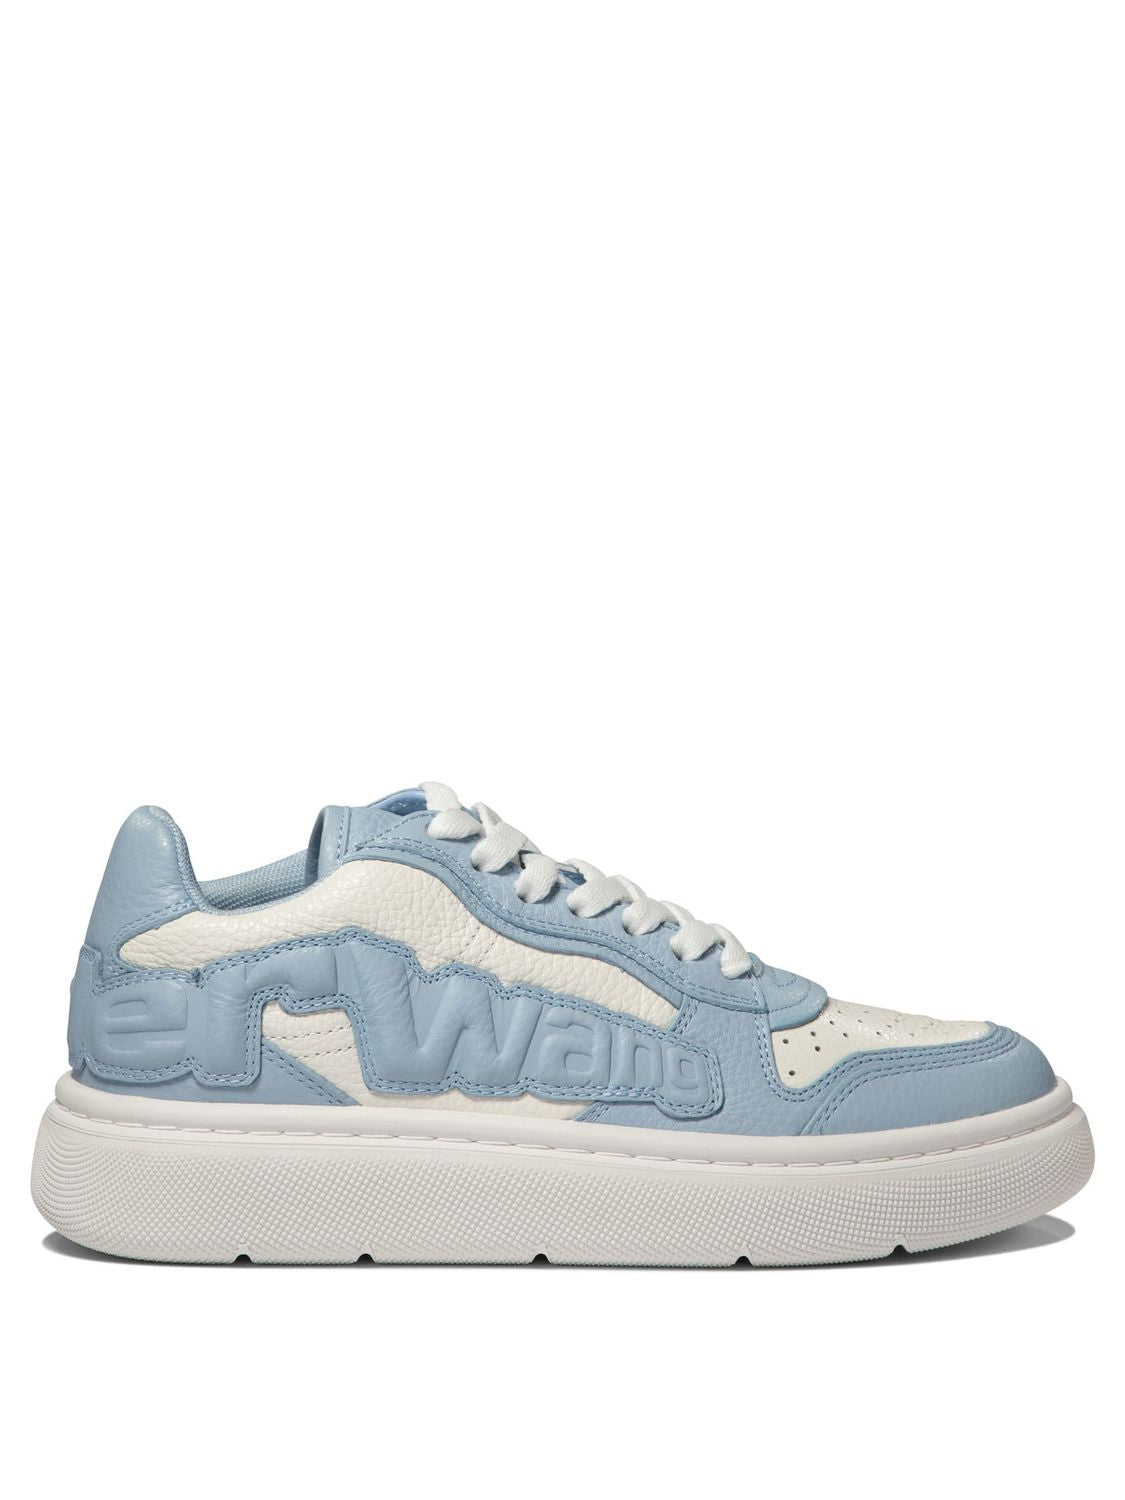 ALEXANDER WANG PUFF PEBBLE LEATHER Sneaker WITH LOGO